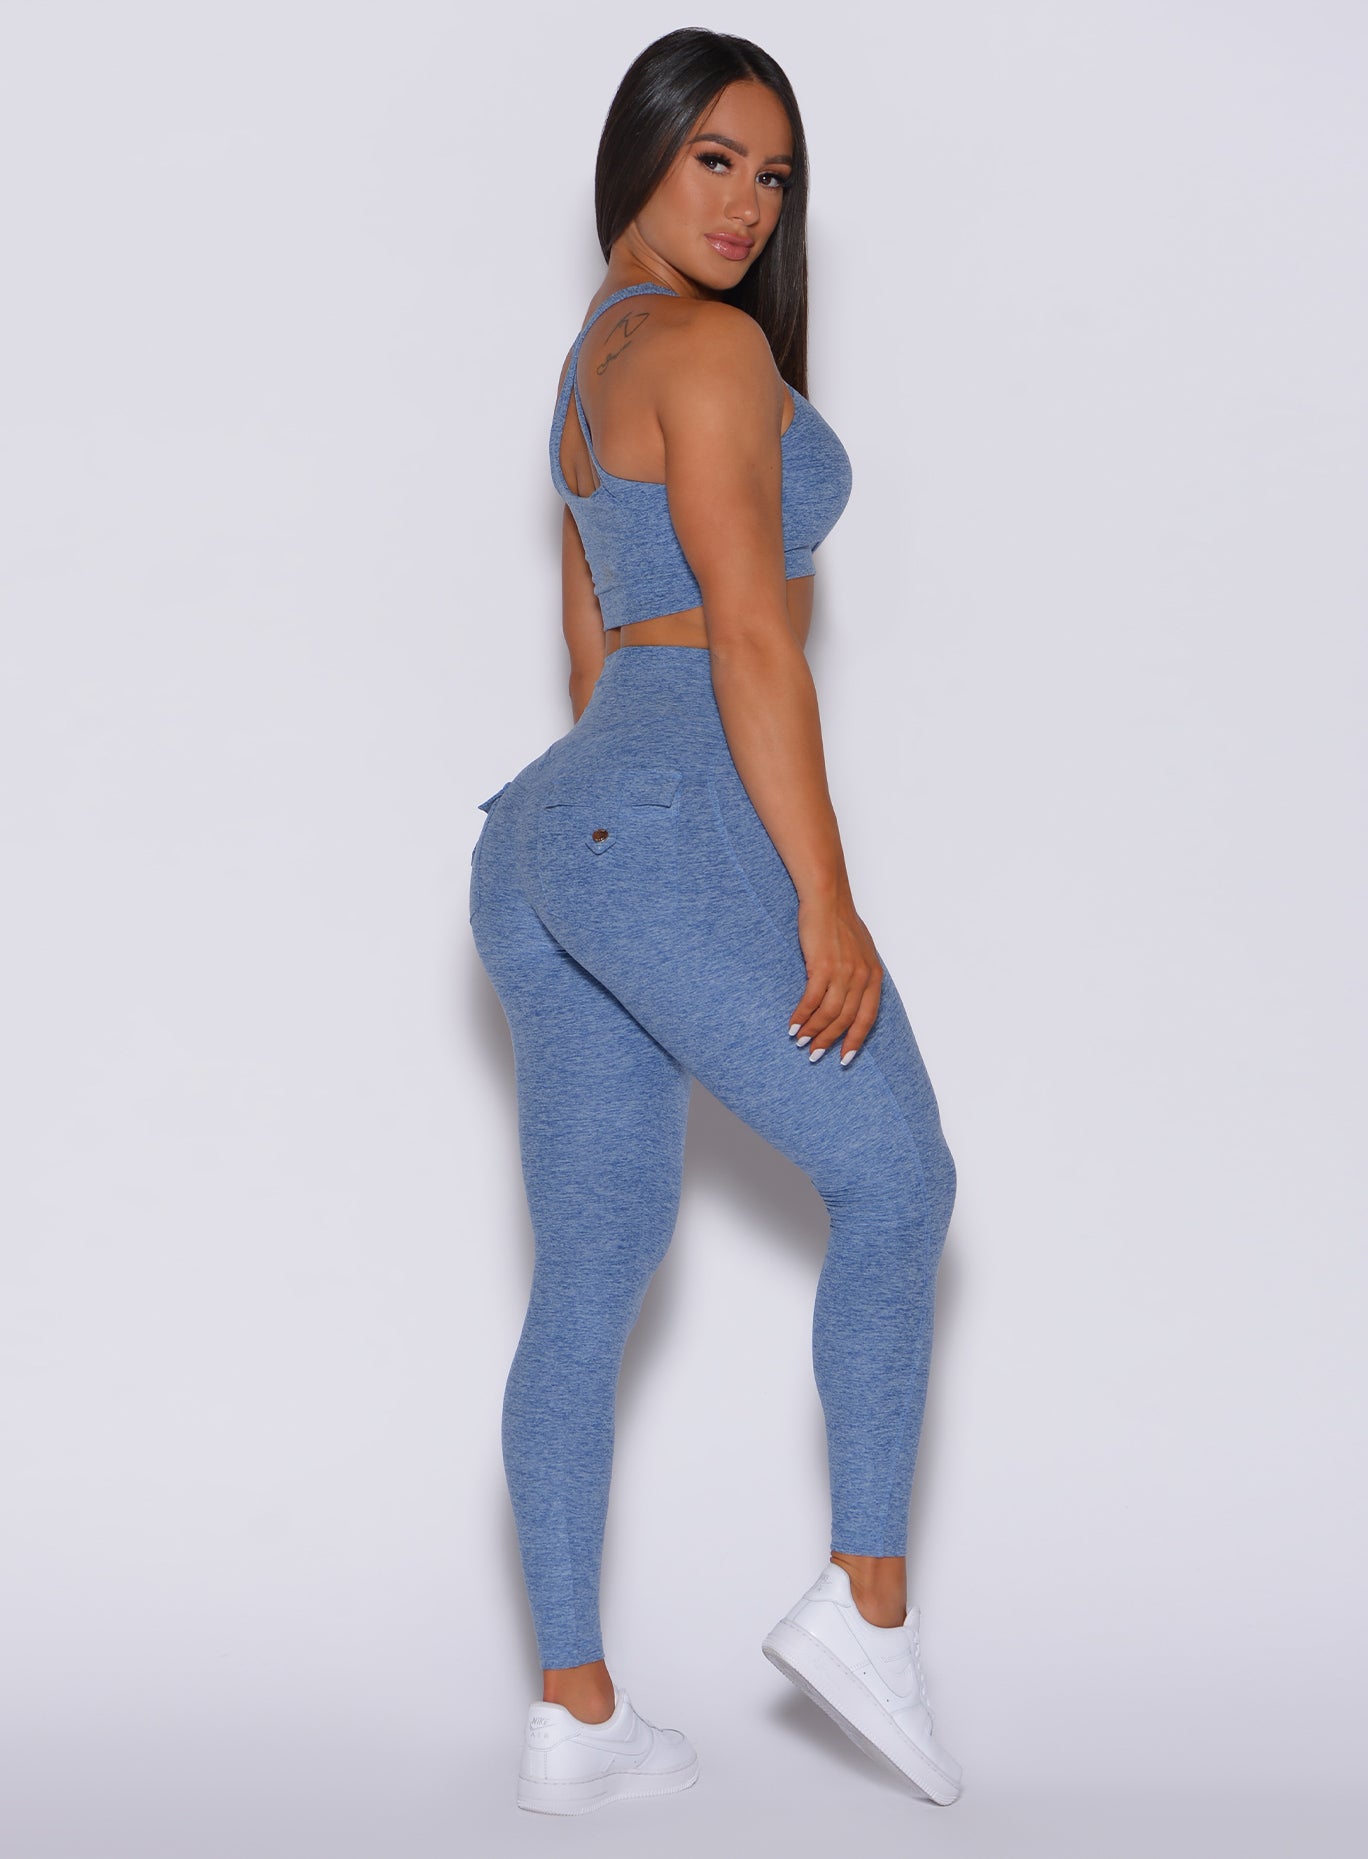 Right profile view of a model in our Pocket Pop Leggings in sky blue color and a matching two way sports bra